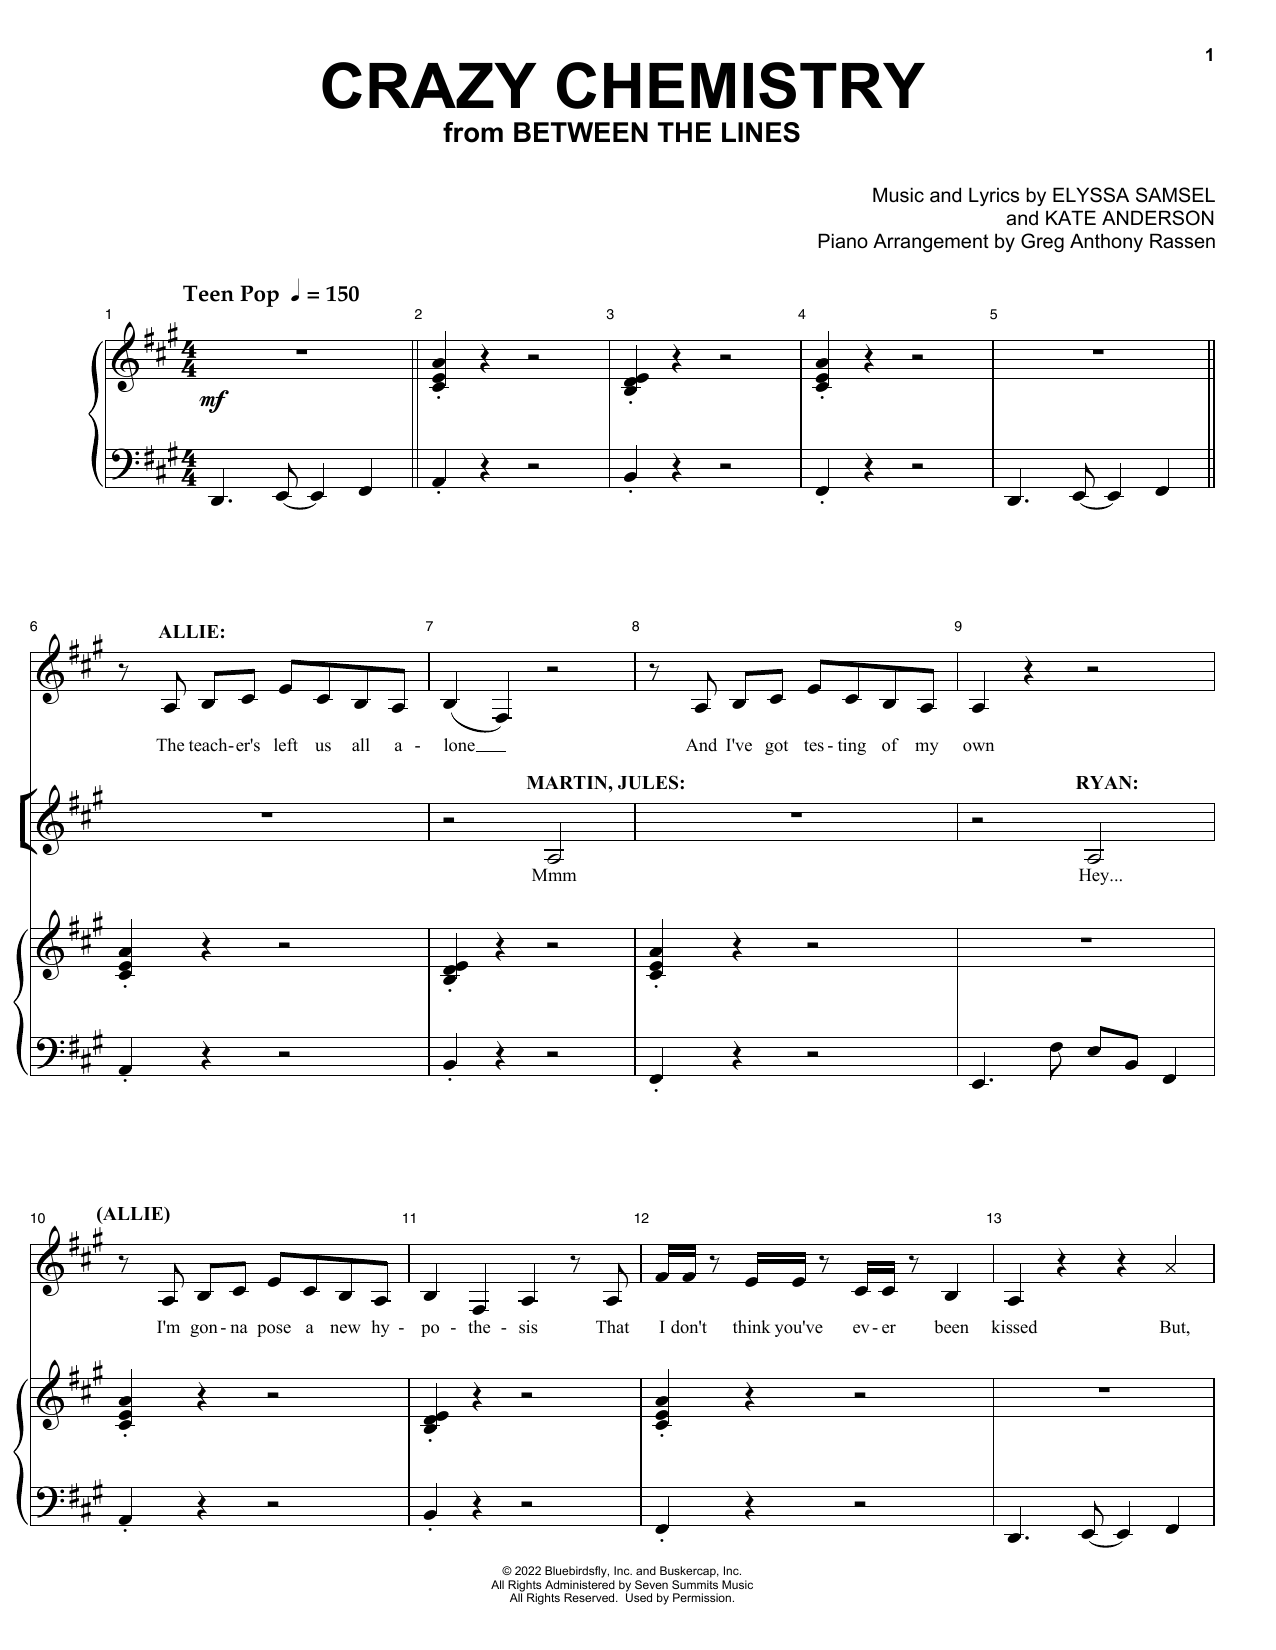 Download Elyssa Samsel & Kate Anderson Crazy Chemistry (from Between The Lines Sheet Music